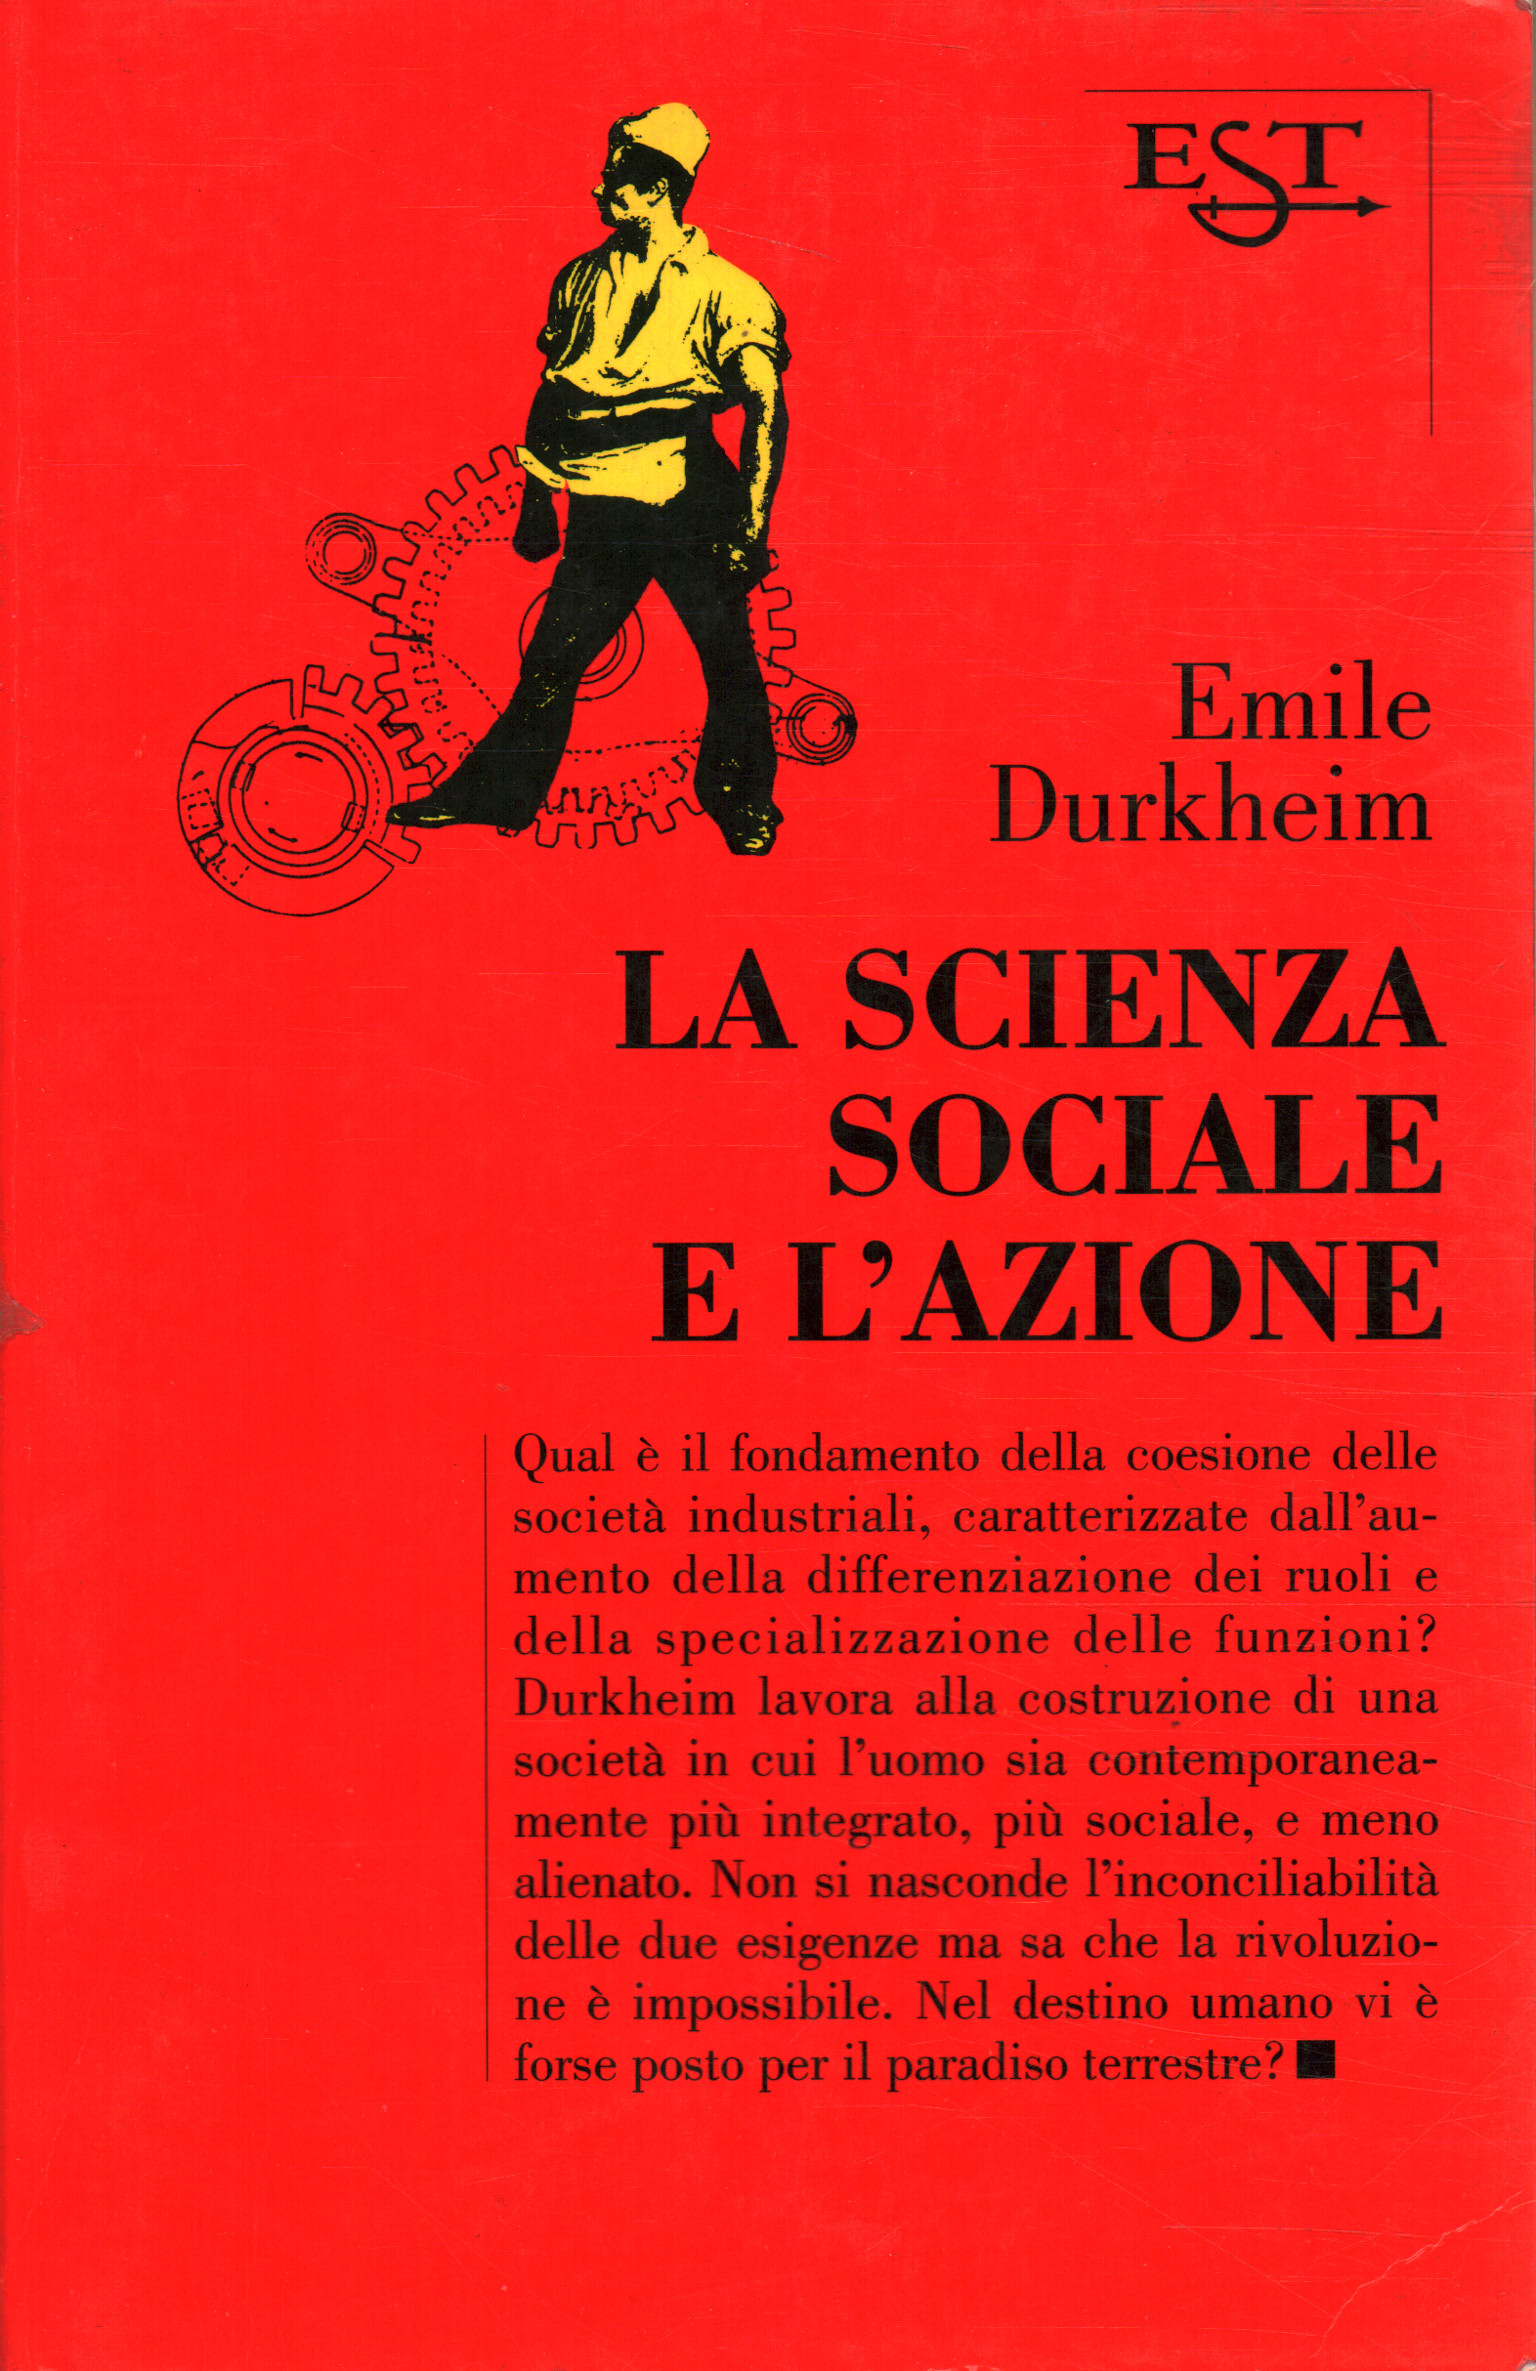 Social science and action